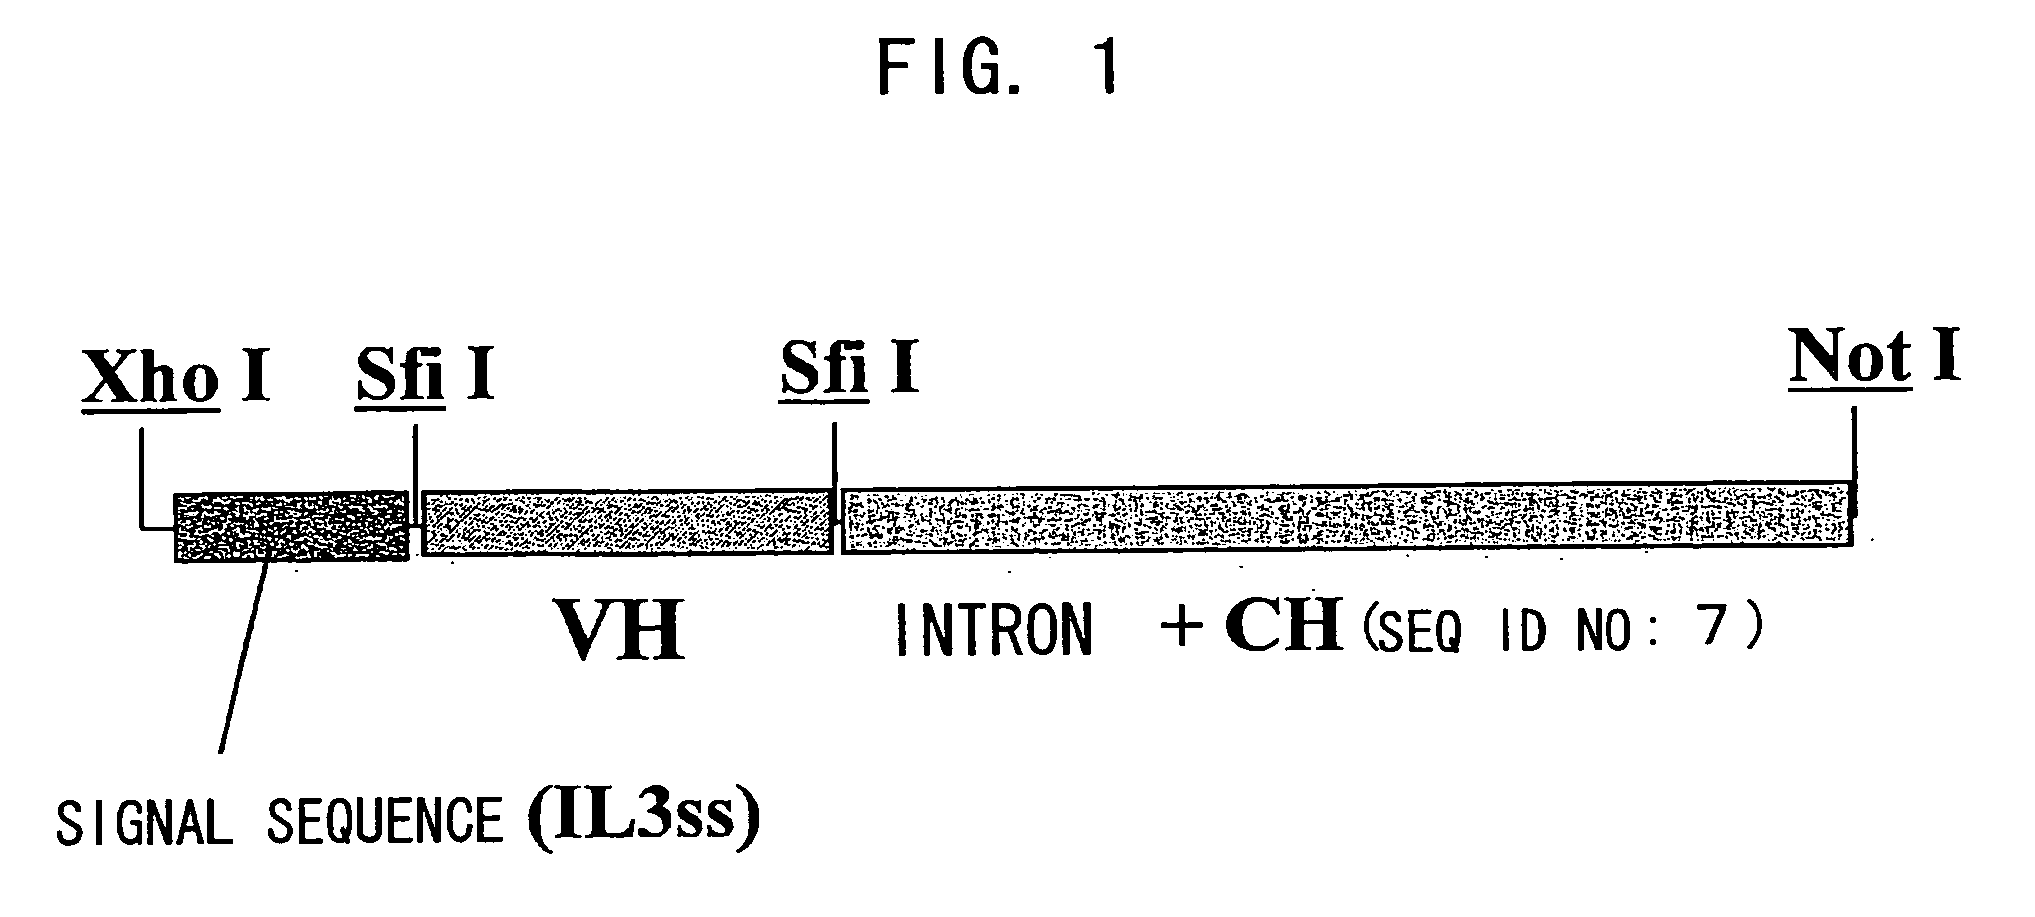 Bispecific antibody substituting for functional proteins